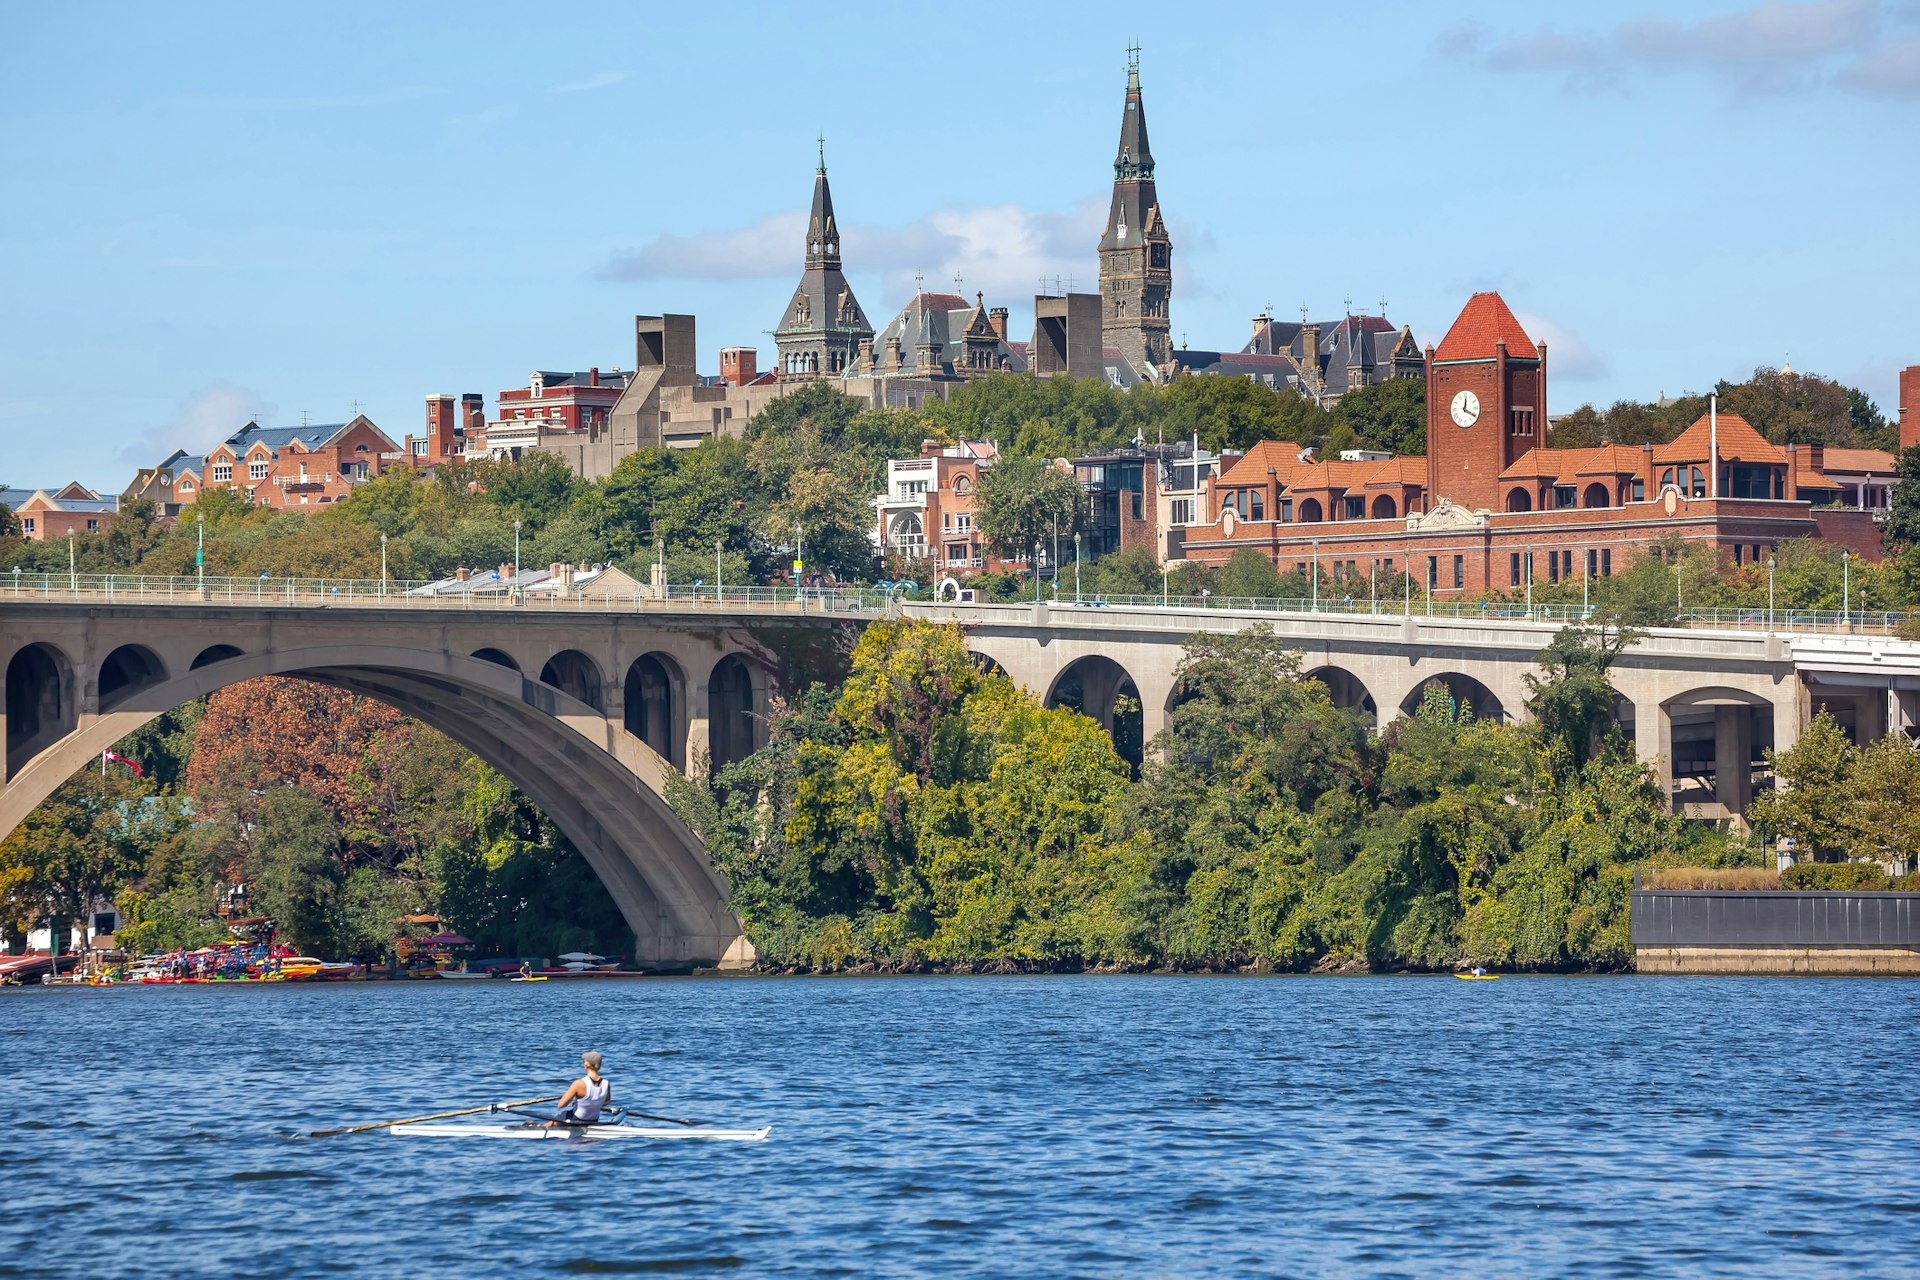 A kayaker on a river heads towards a bridge. A large Gothic-style building rises up on the river bank